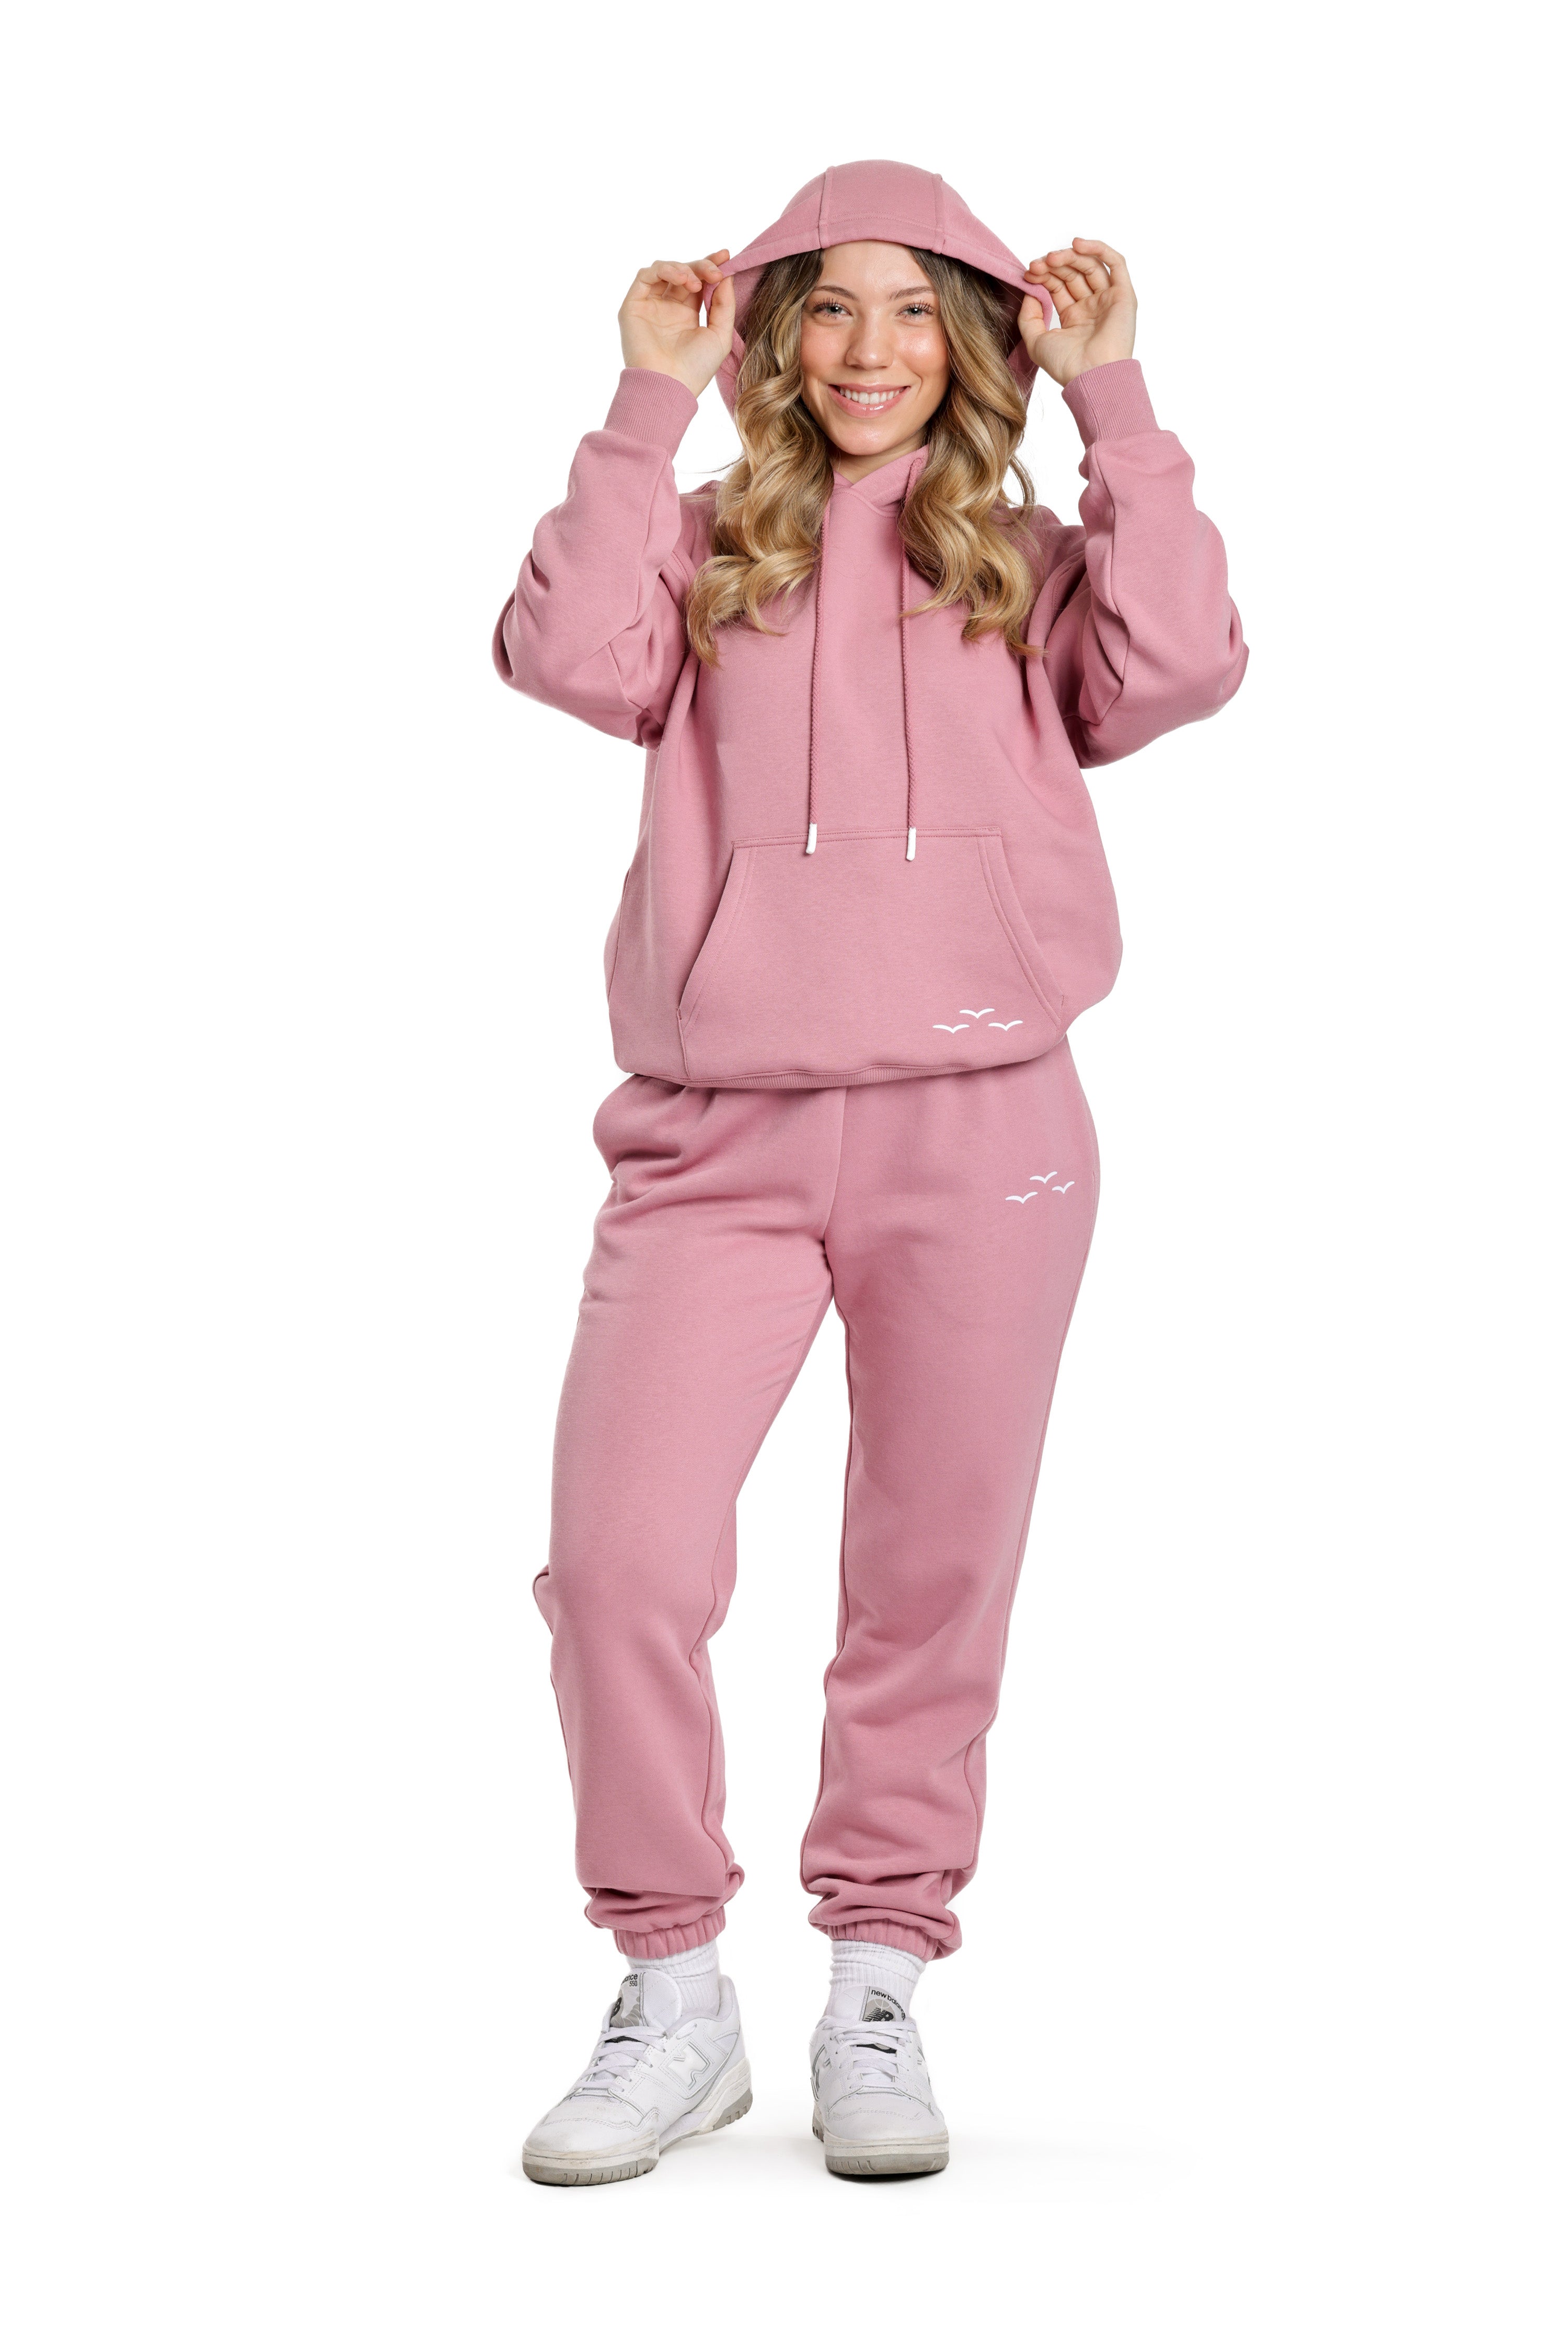 Women's tracksuit in orchid pink